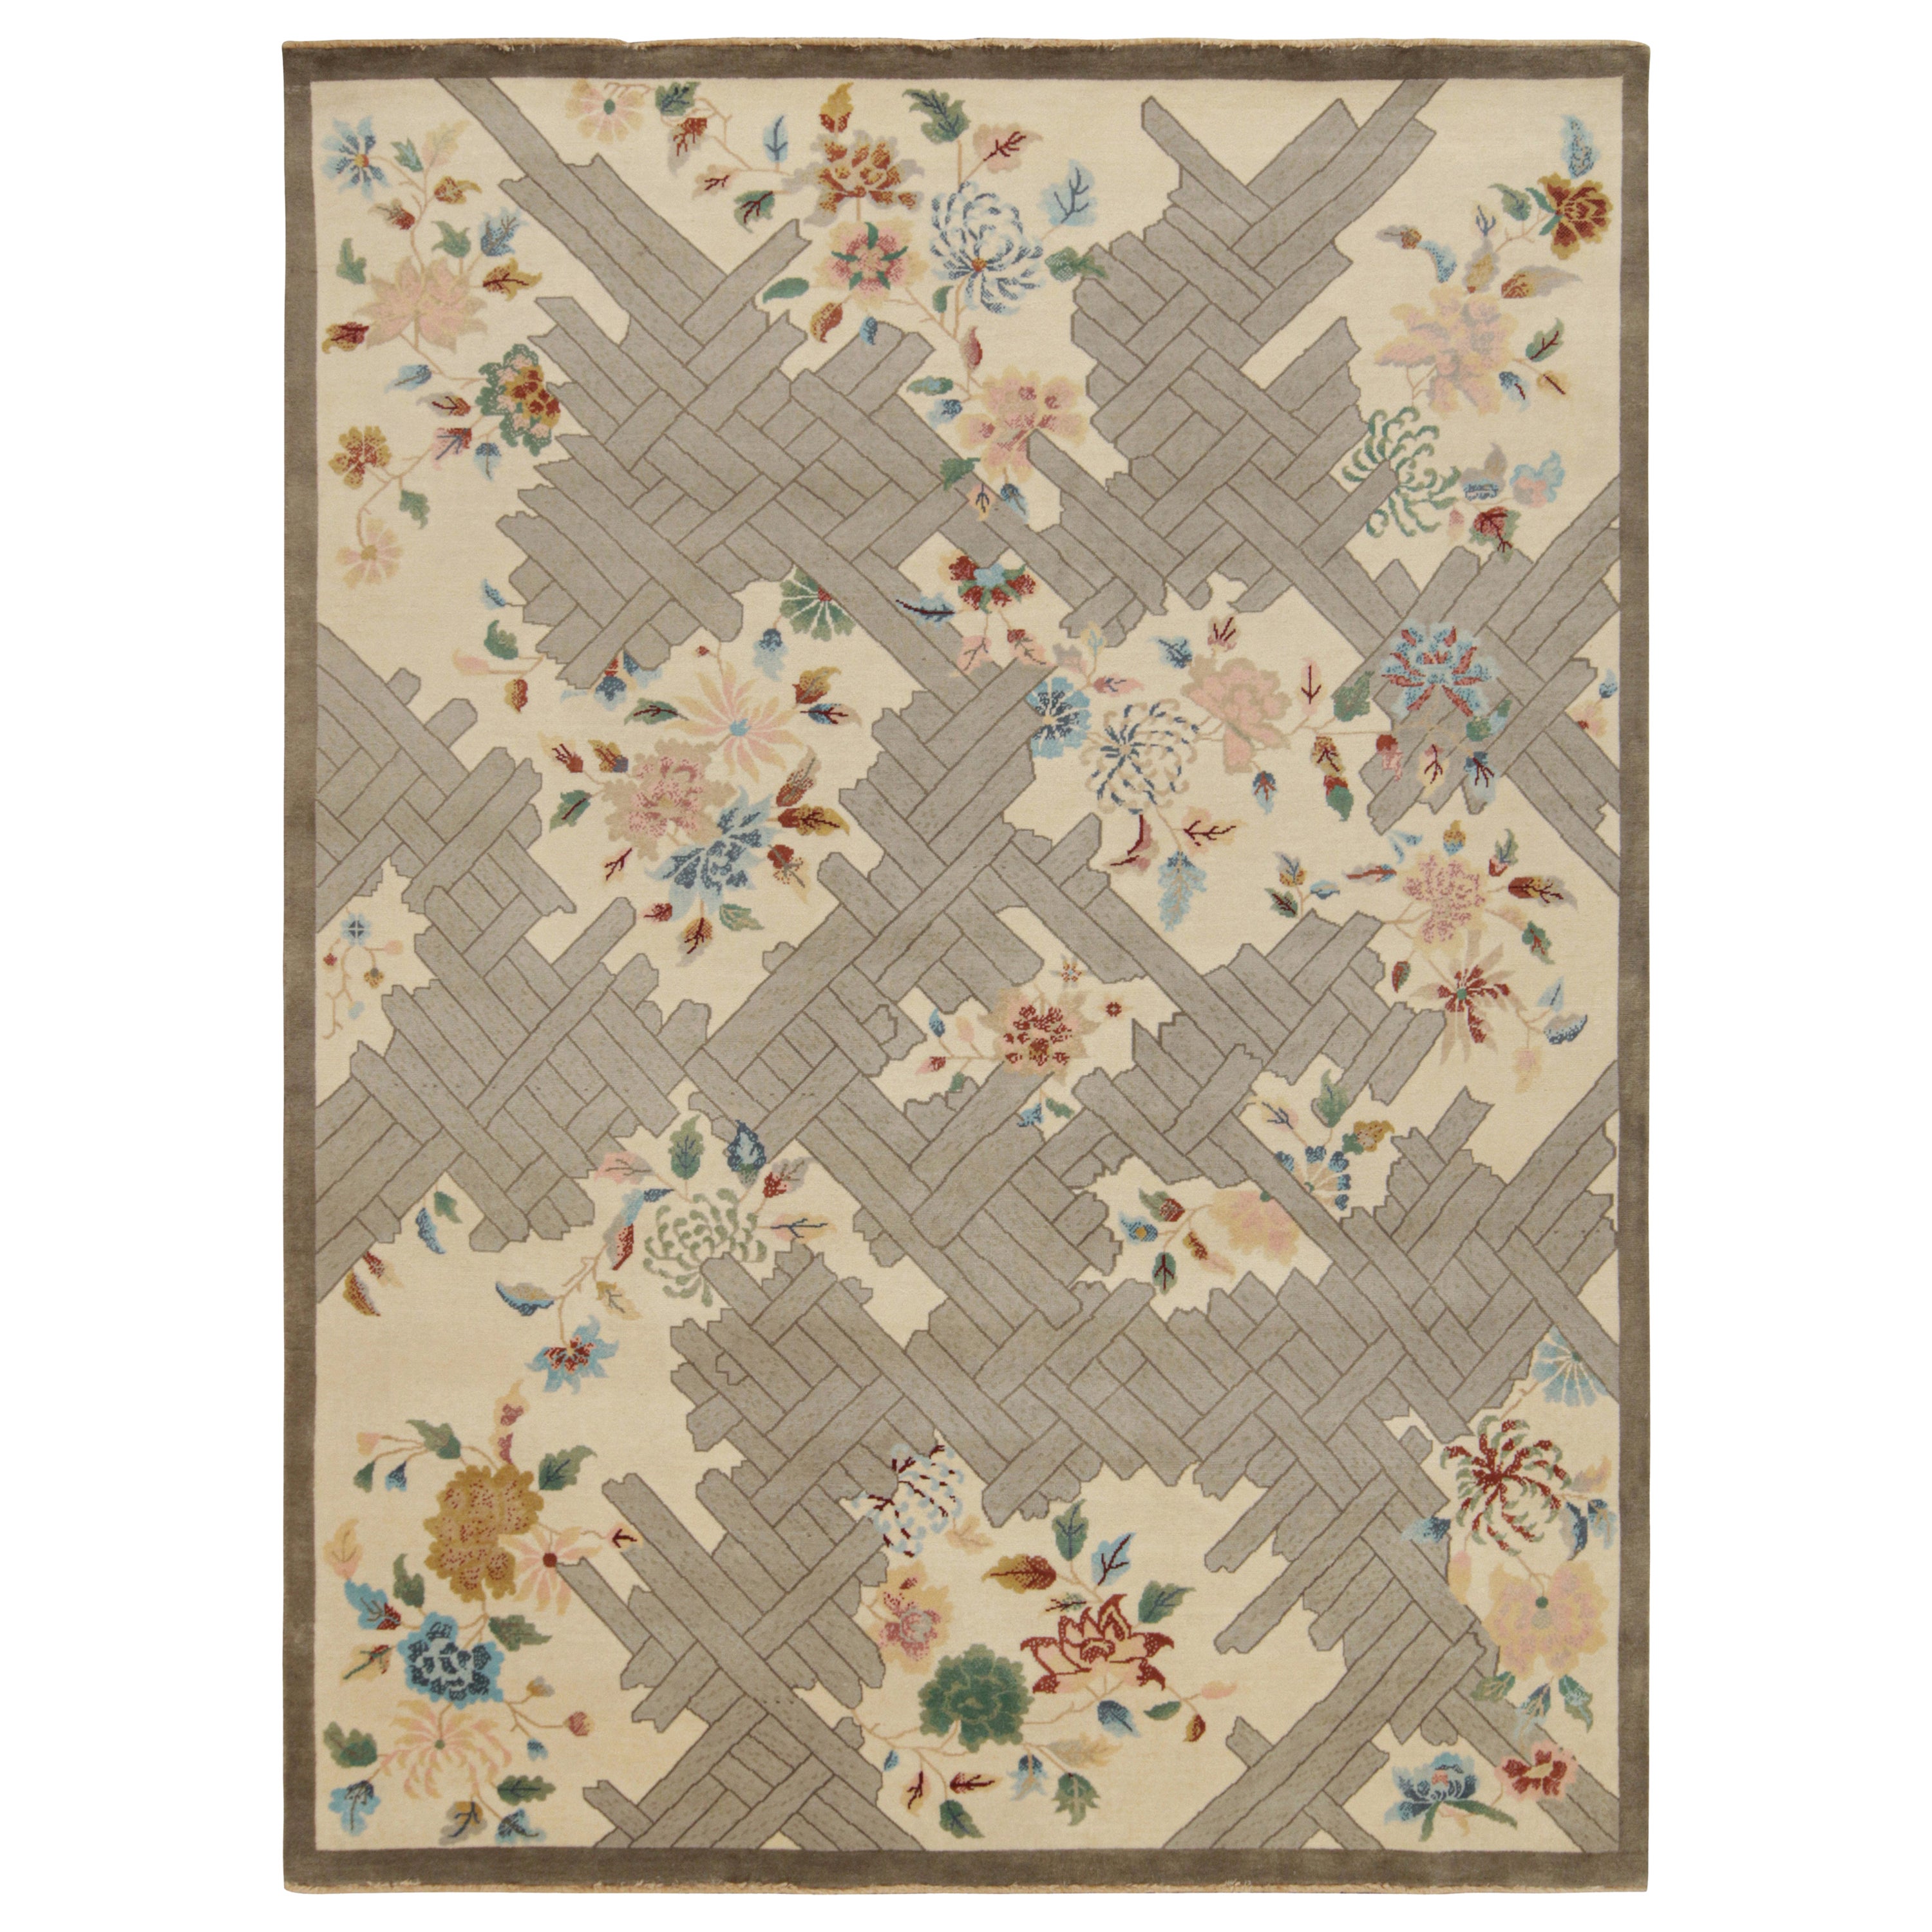 Rug & Kilim’s Chinese Style Art Deco Rug in Beige with Colorful Florals